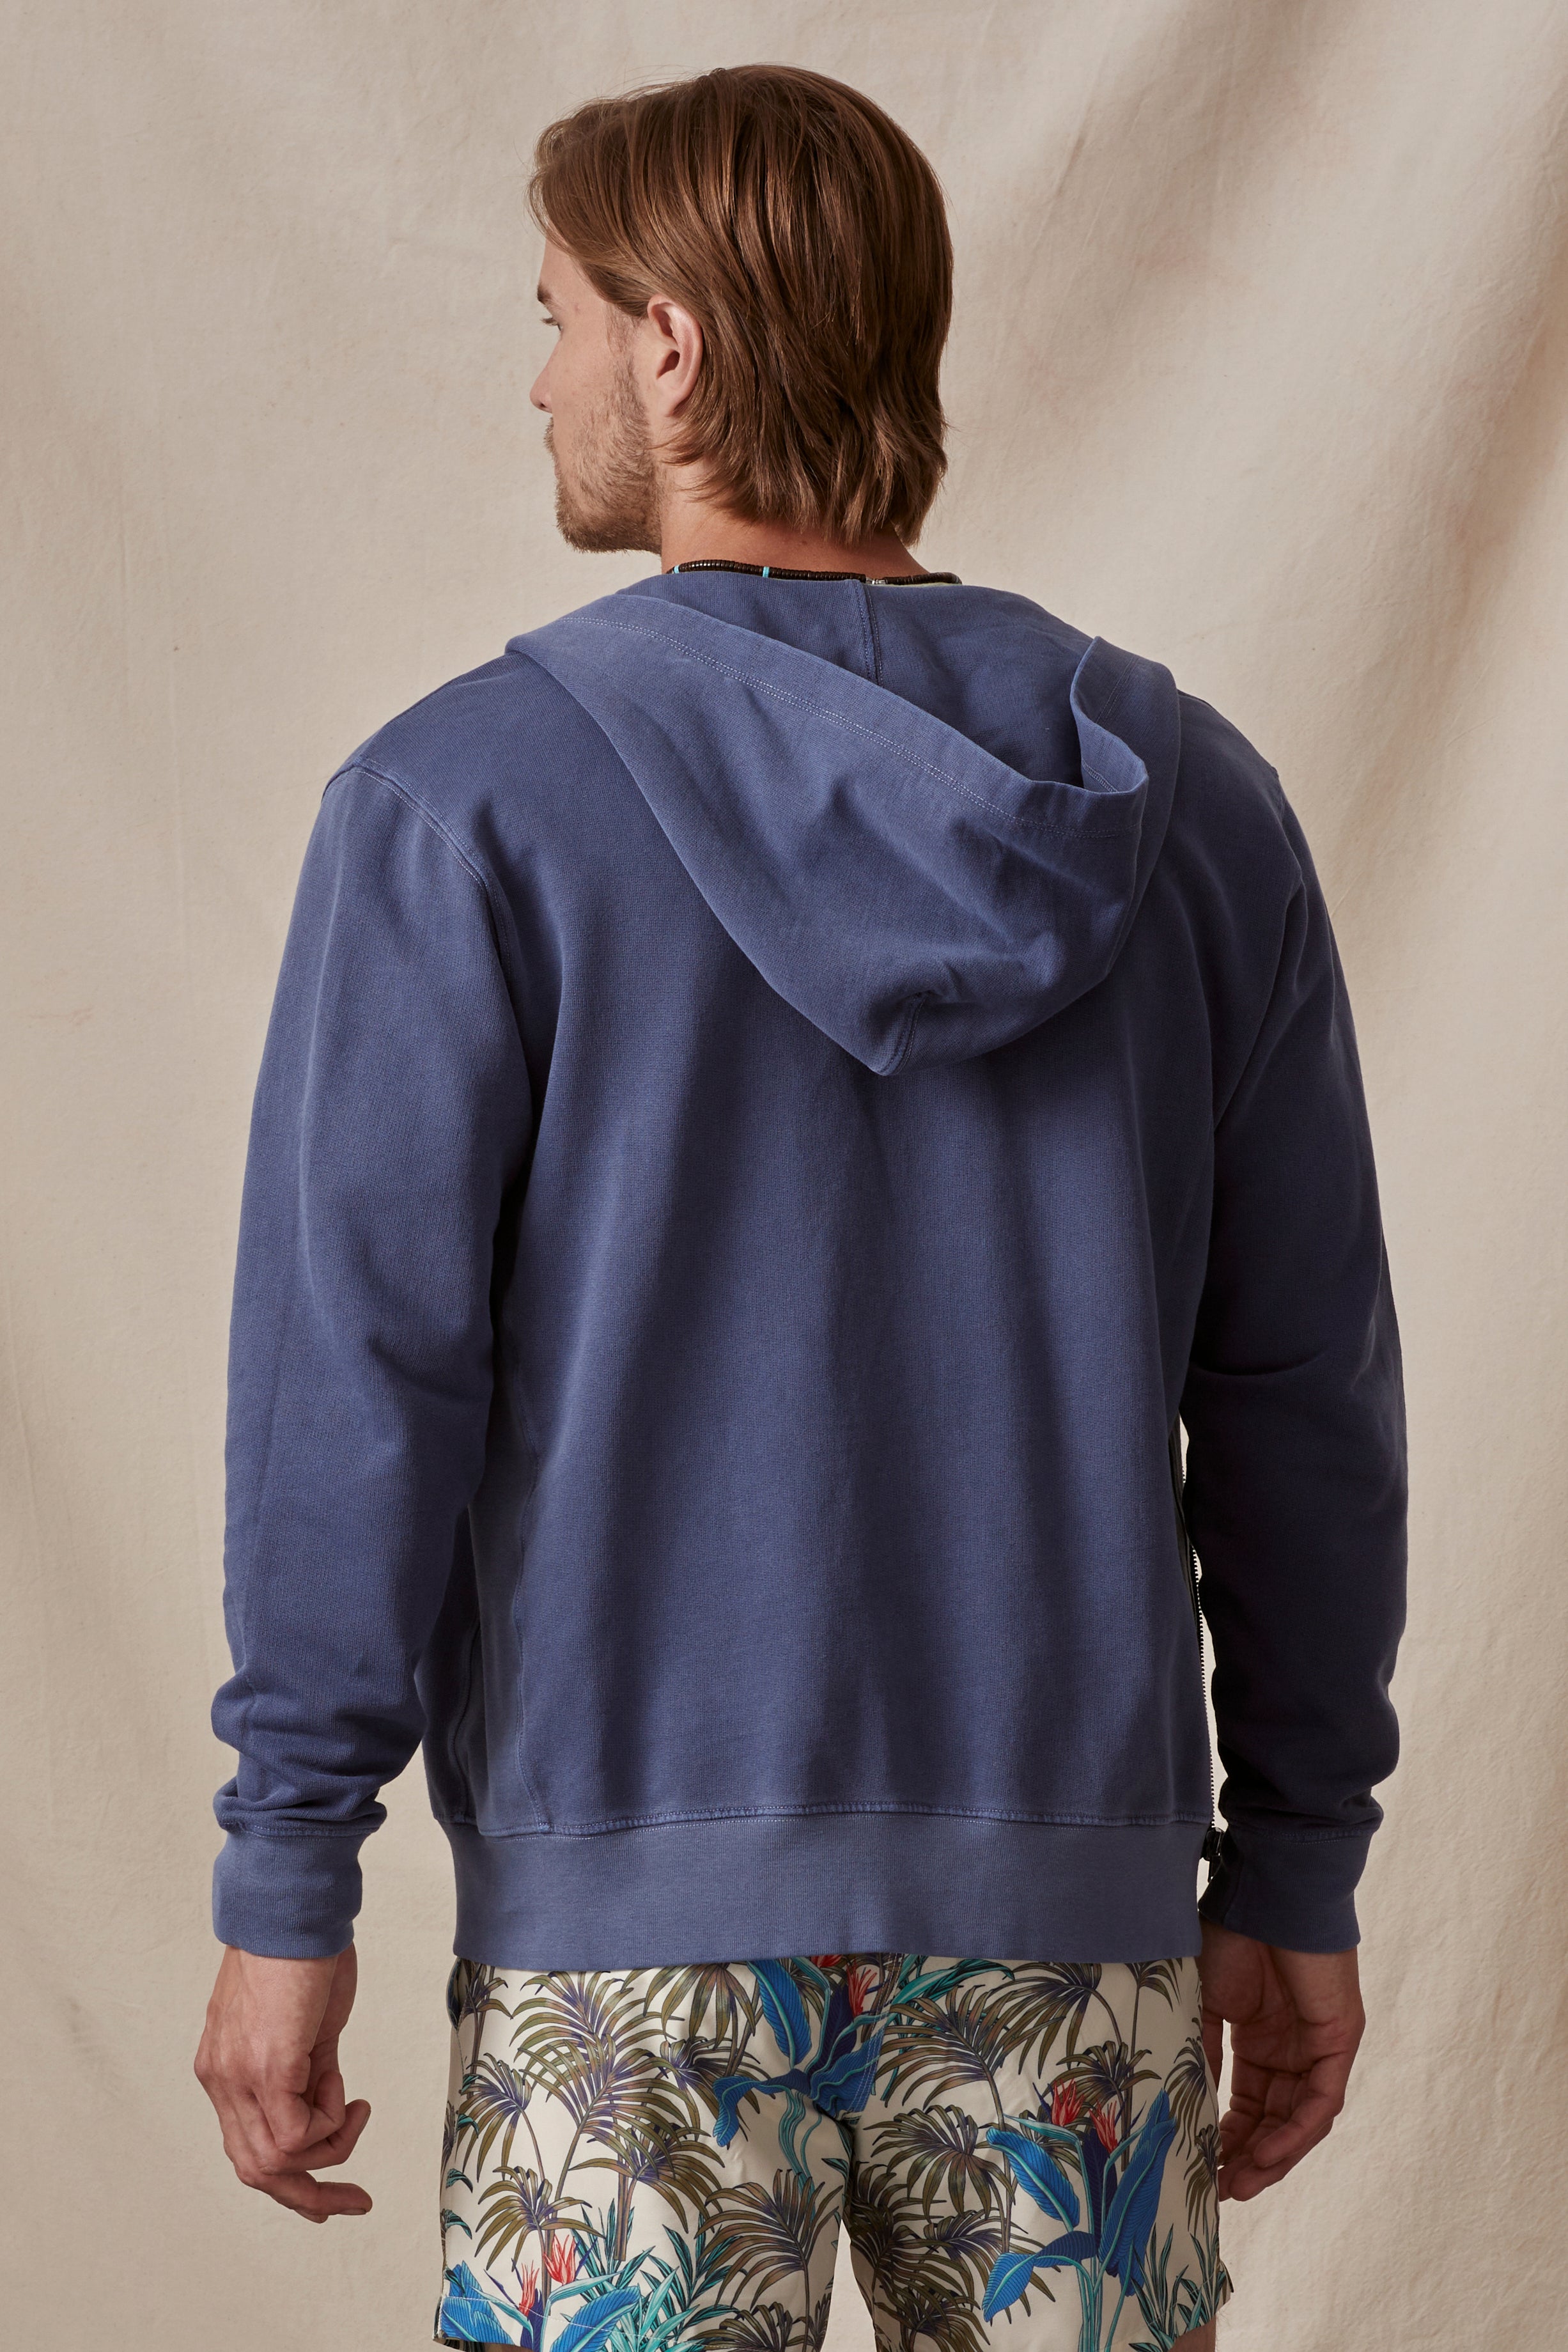   Man from behind wearing a Velvet by Graham & Spencer VINCENT HOODIE and patterned shorts, standing against a neutral backdrop. 